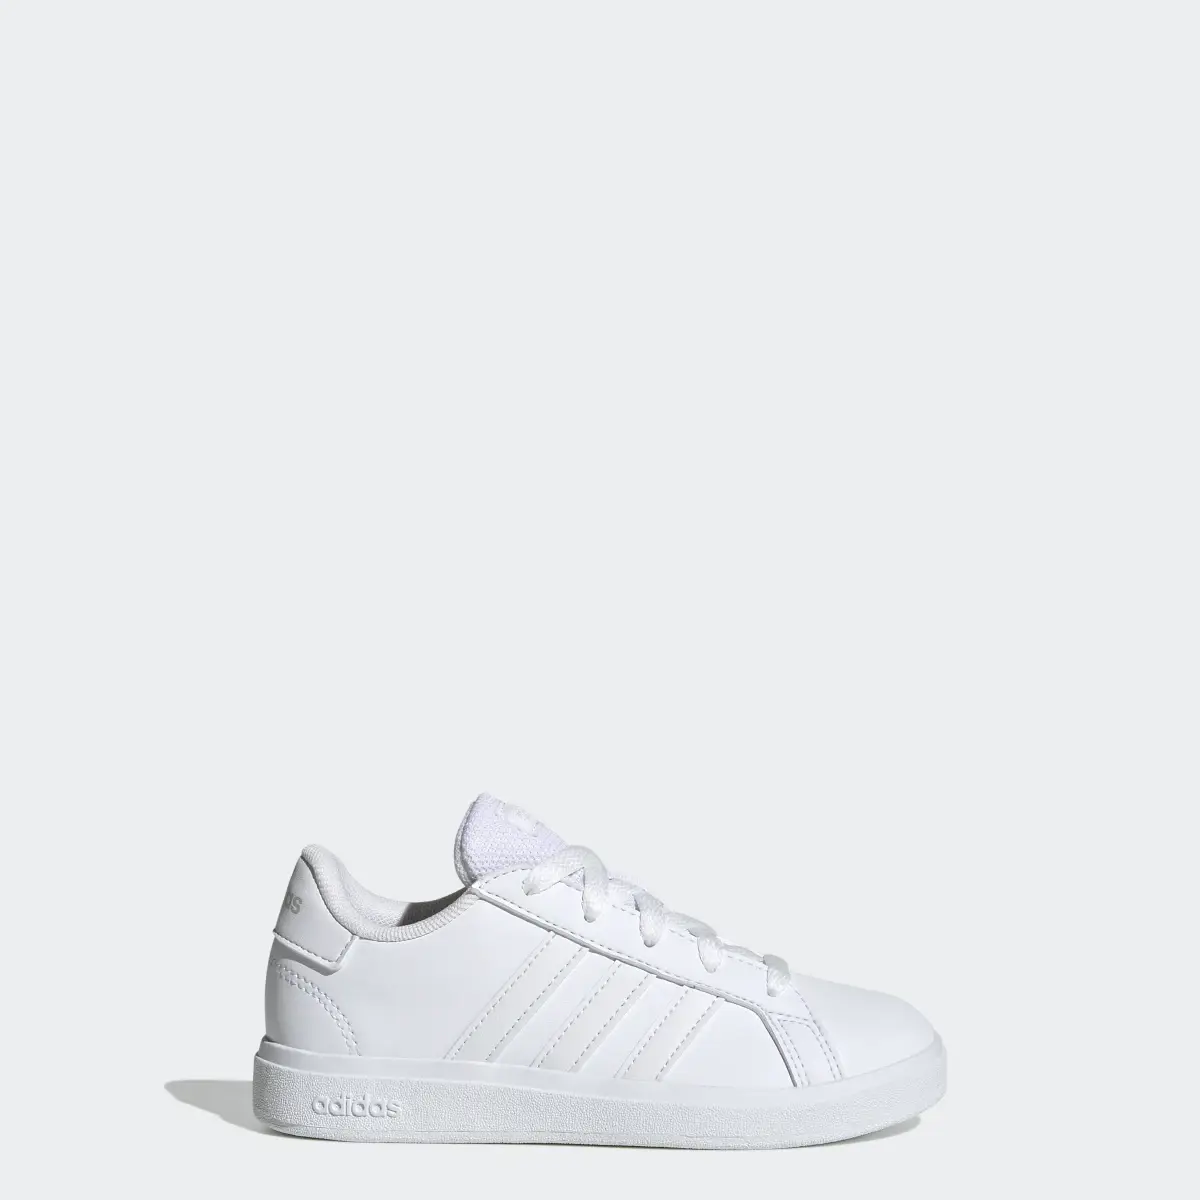 Adidas Grand Court Lifestyle Tennis Lace-Up Shoes. 1